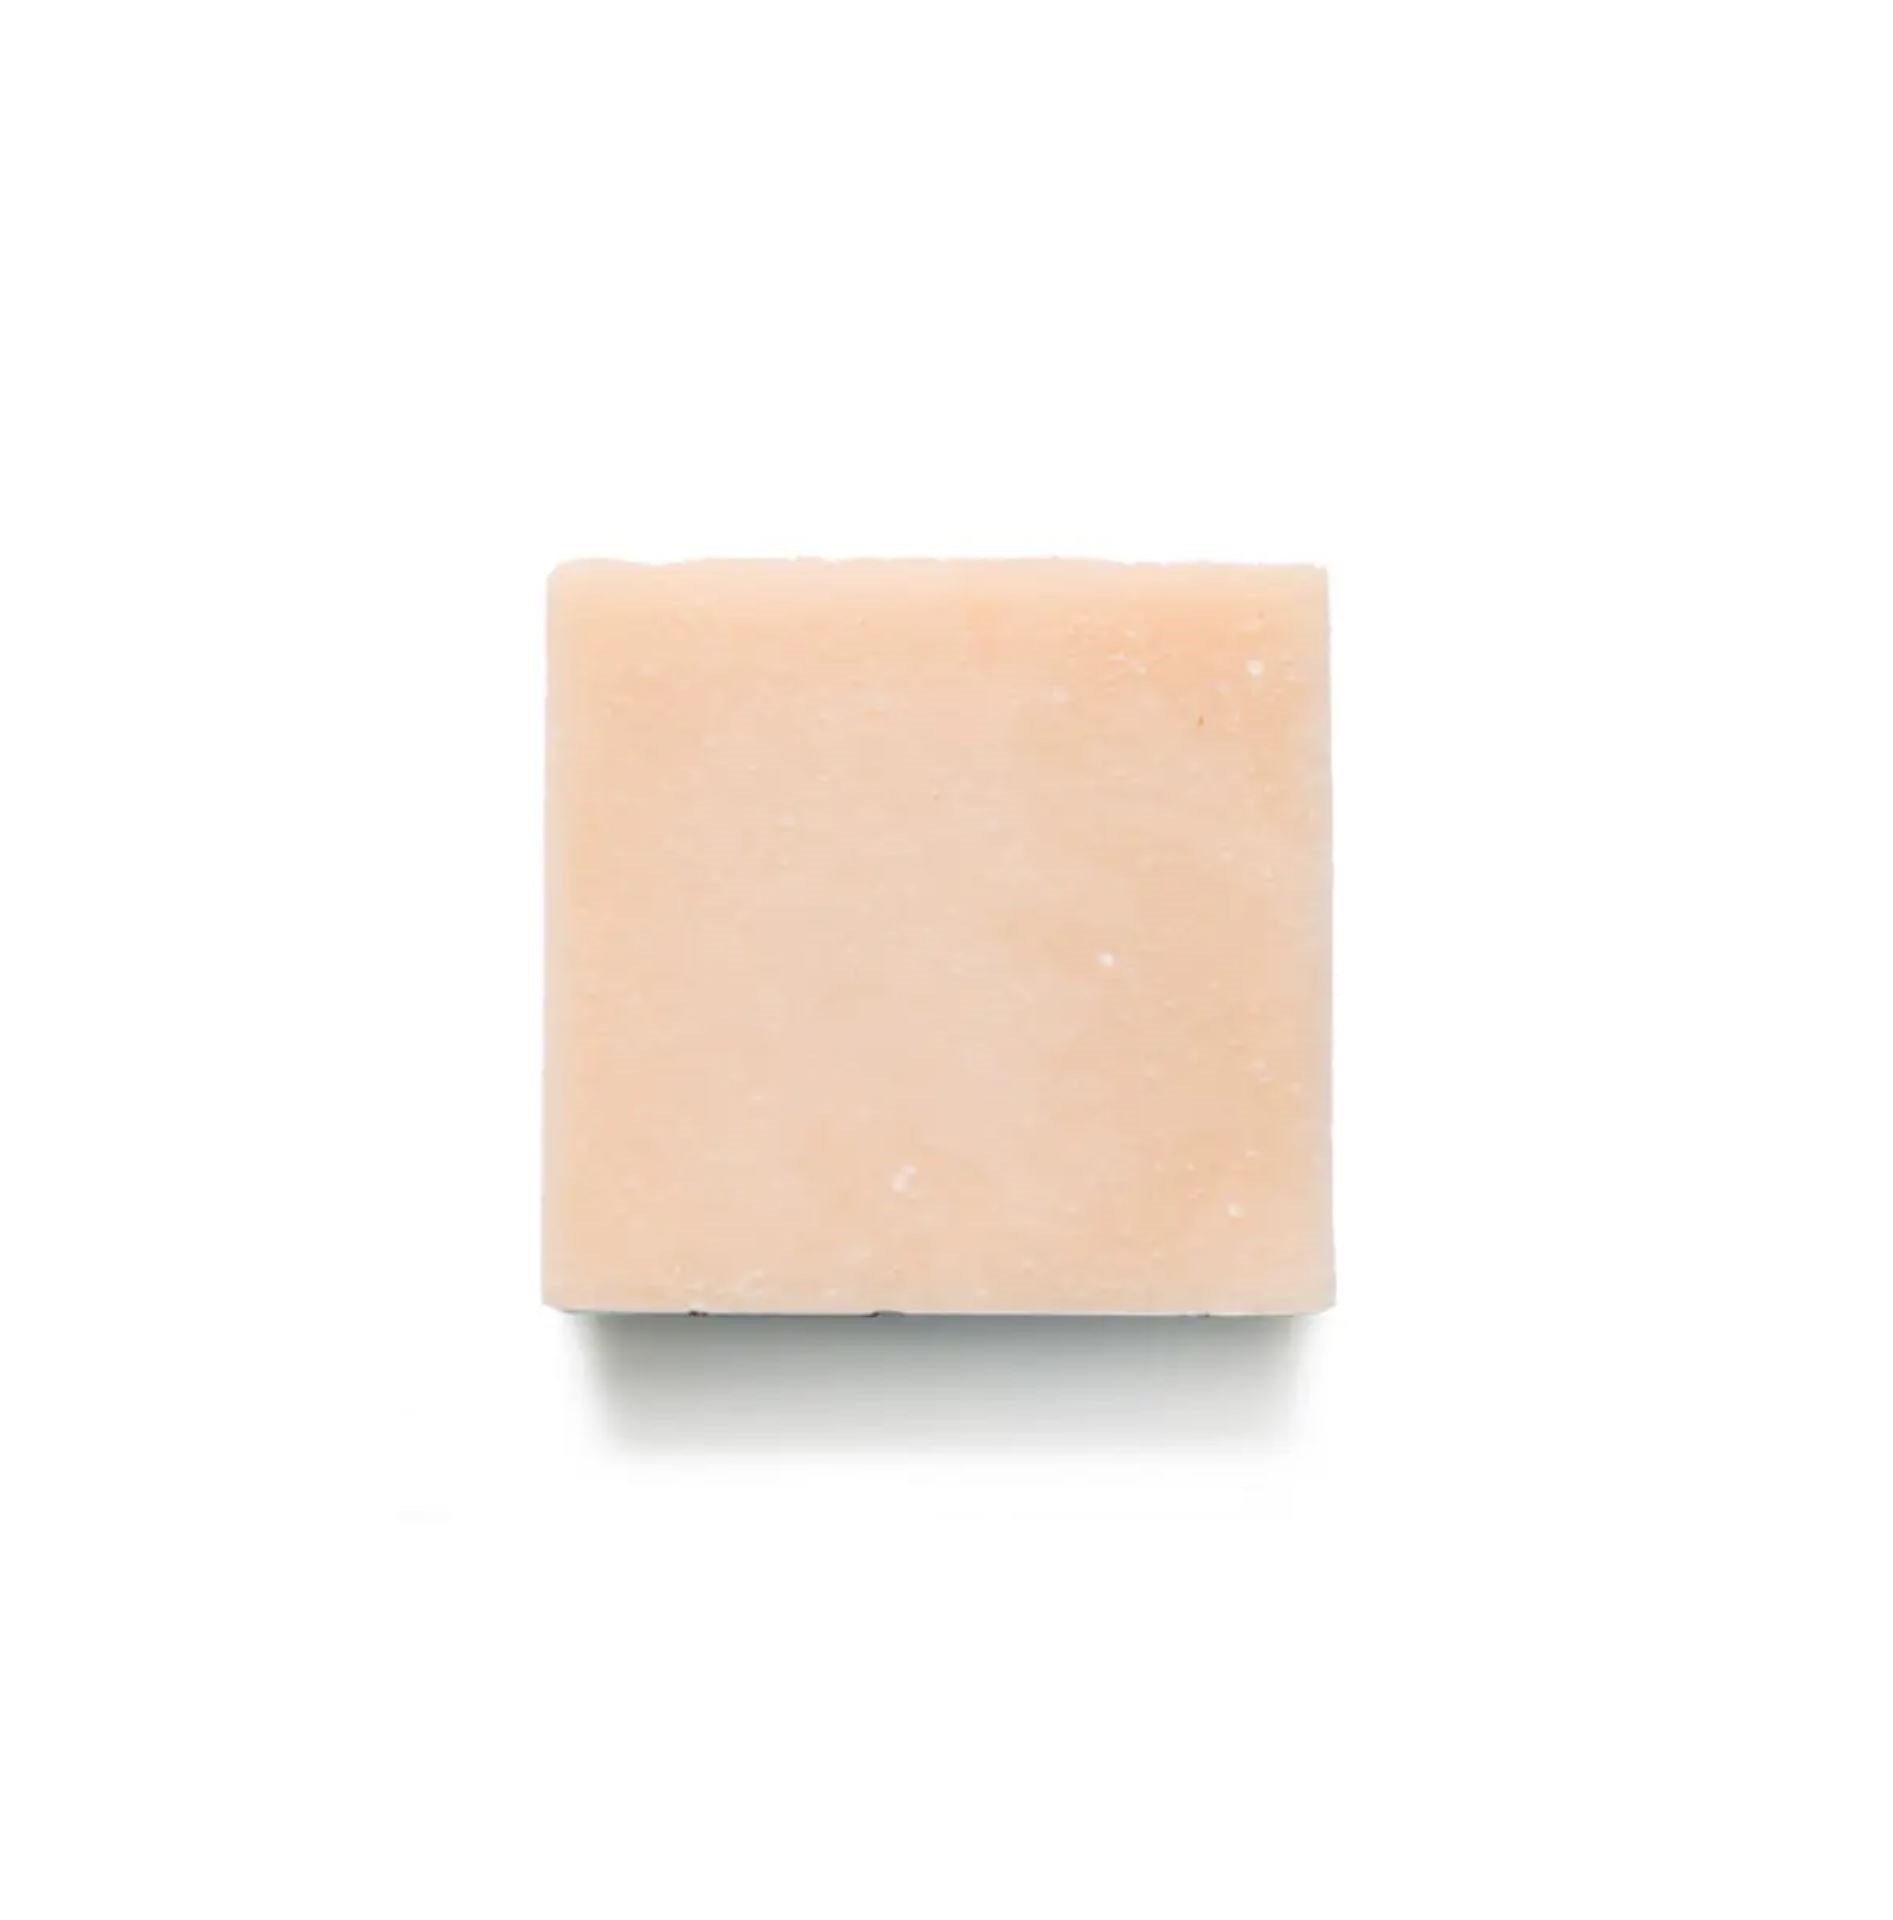 Facial Soap S3 Calamine & Hyaluronic Acid